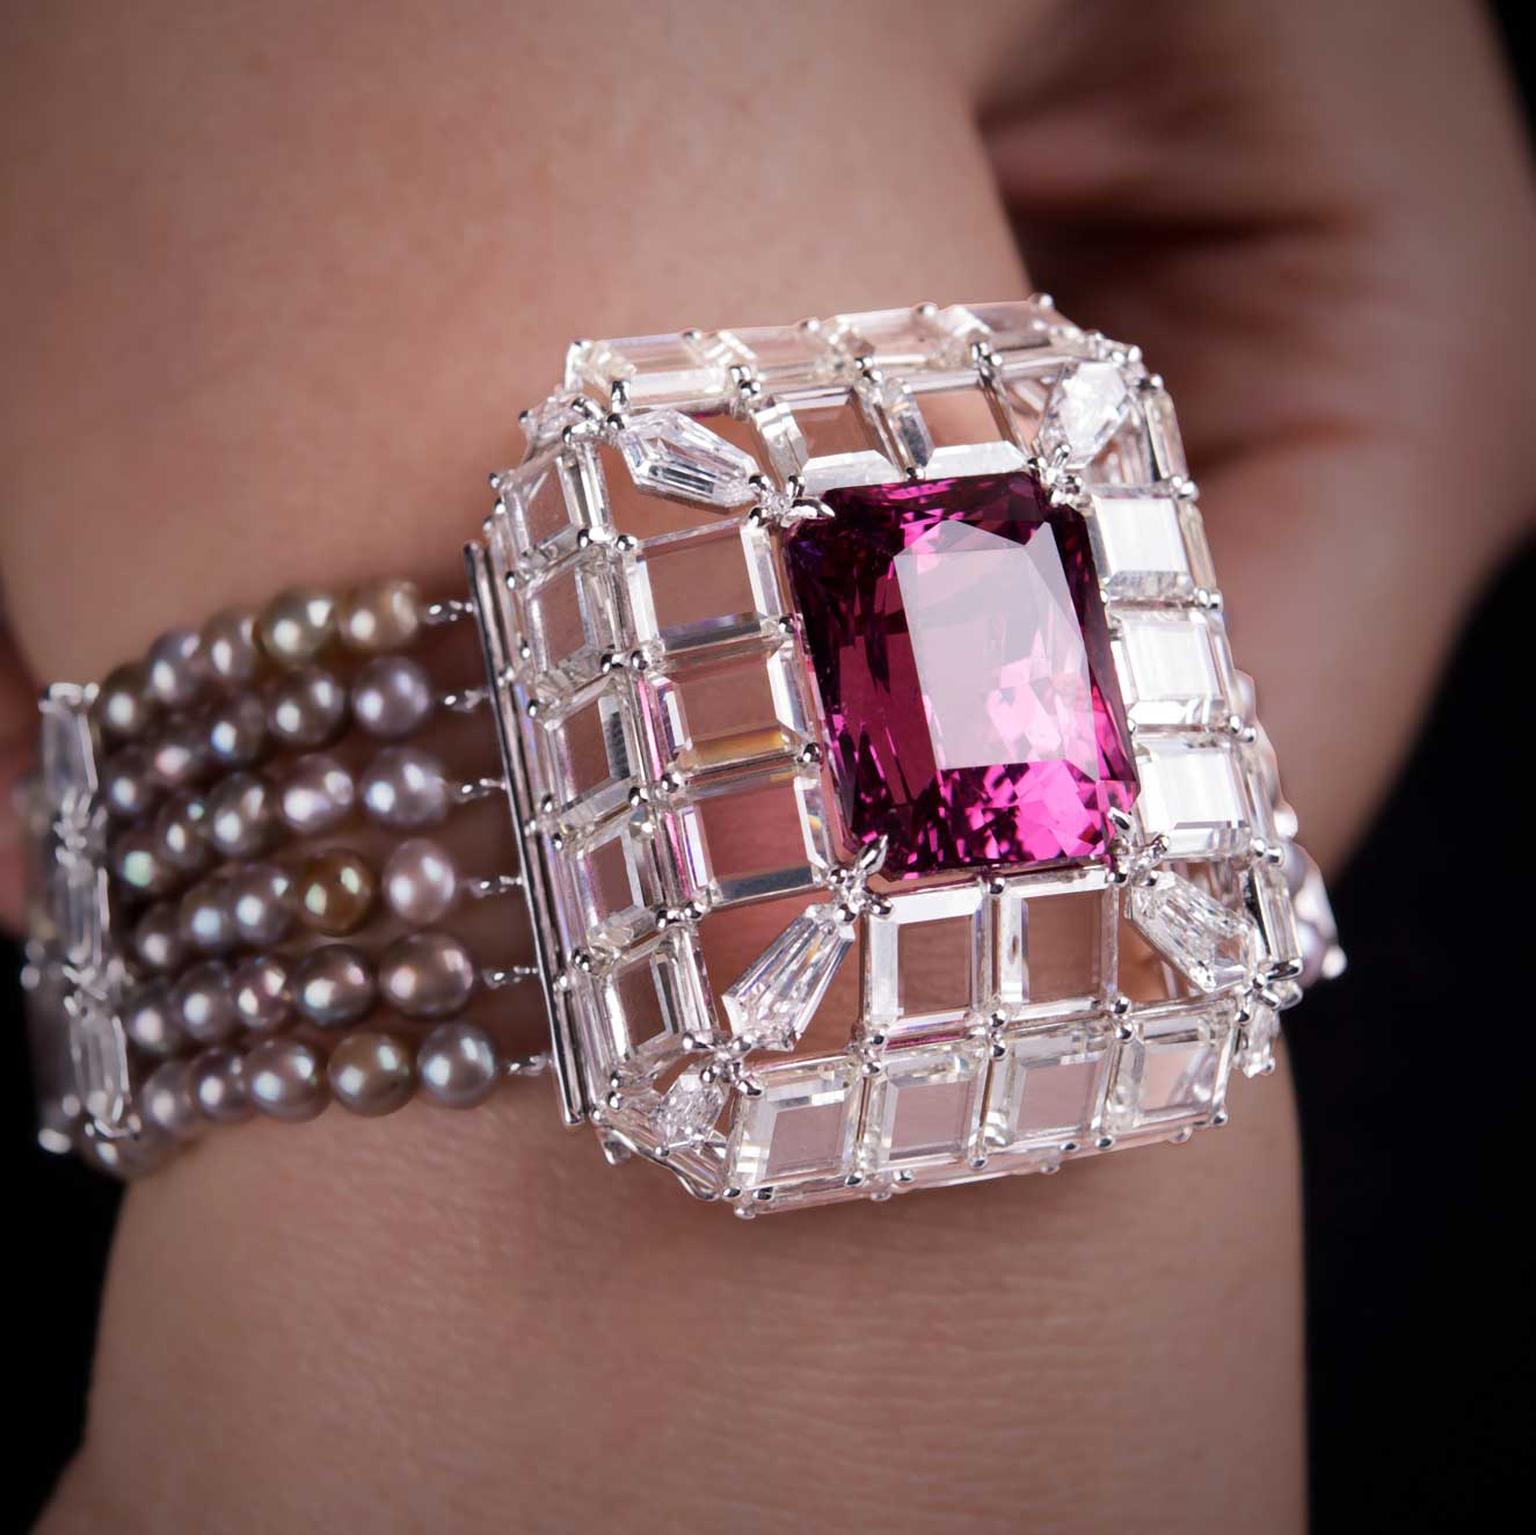 Ruby, rubellite or red spinel: which rouge are you?